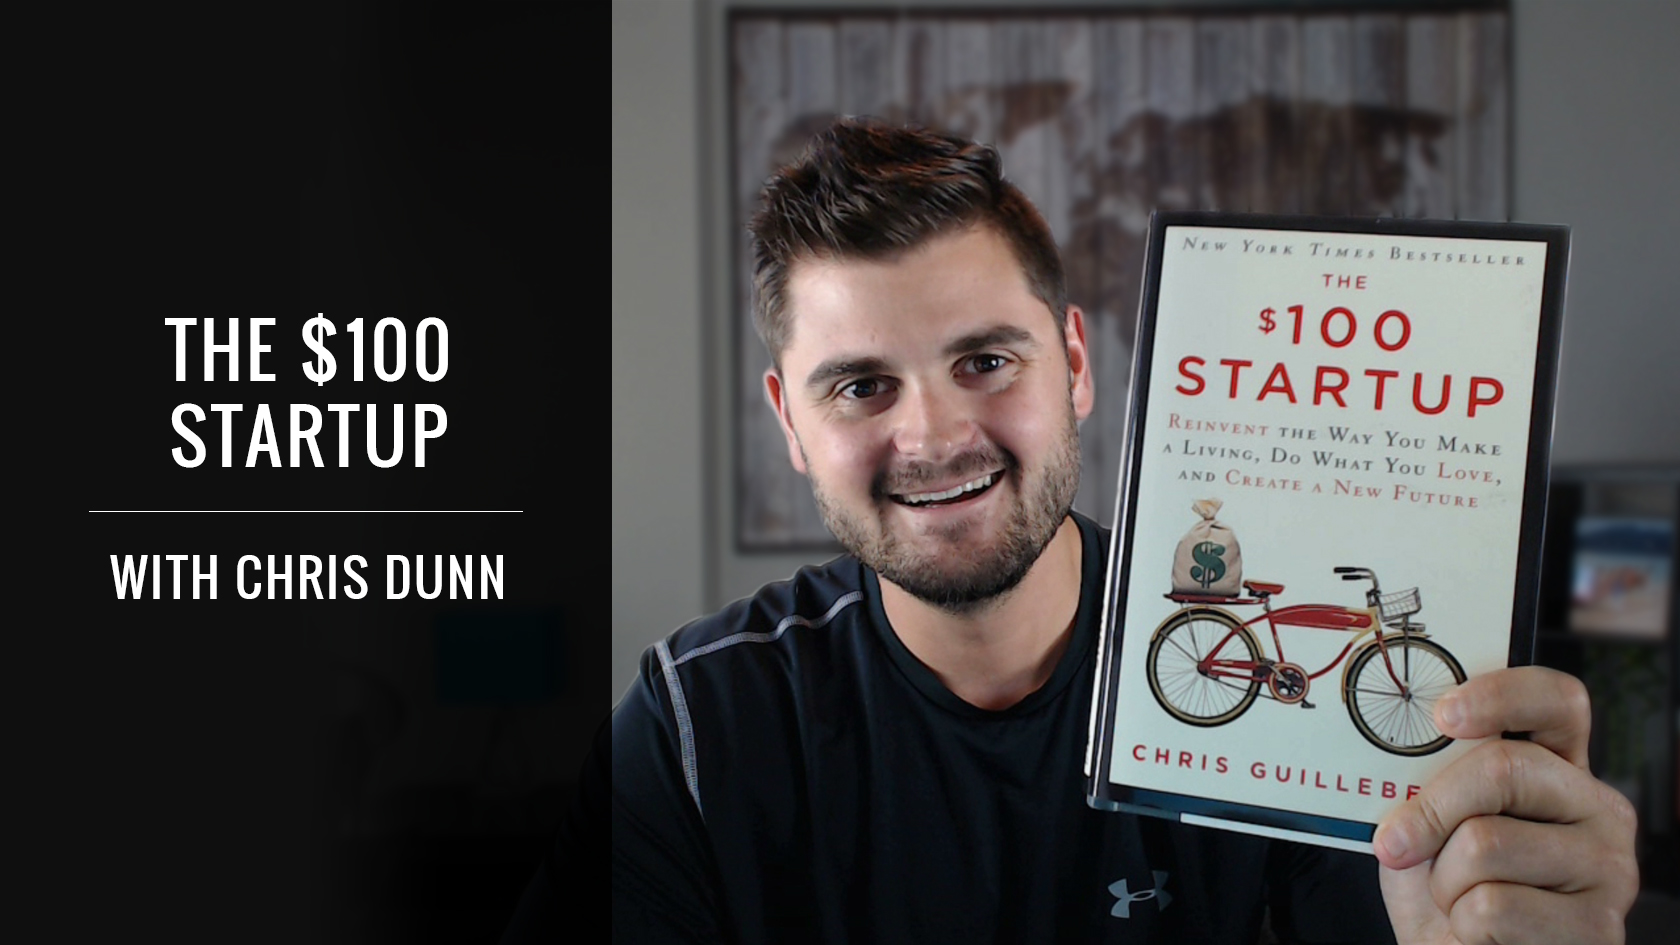 Когда будут 100 стартапов. Chris Guillebeau: the $100 Startup. The 100 Startup by Chris Guillebeau. The 100 Startup книга. Стартап за 100 $.